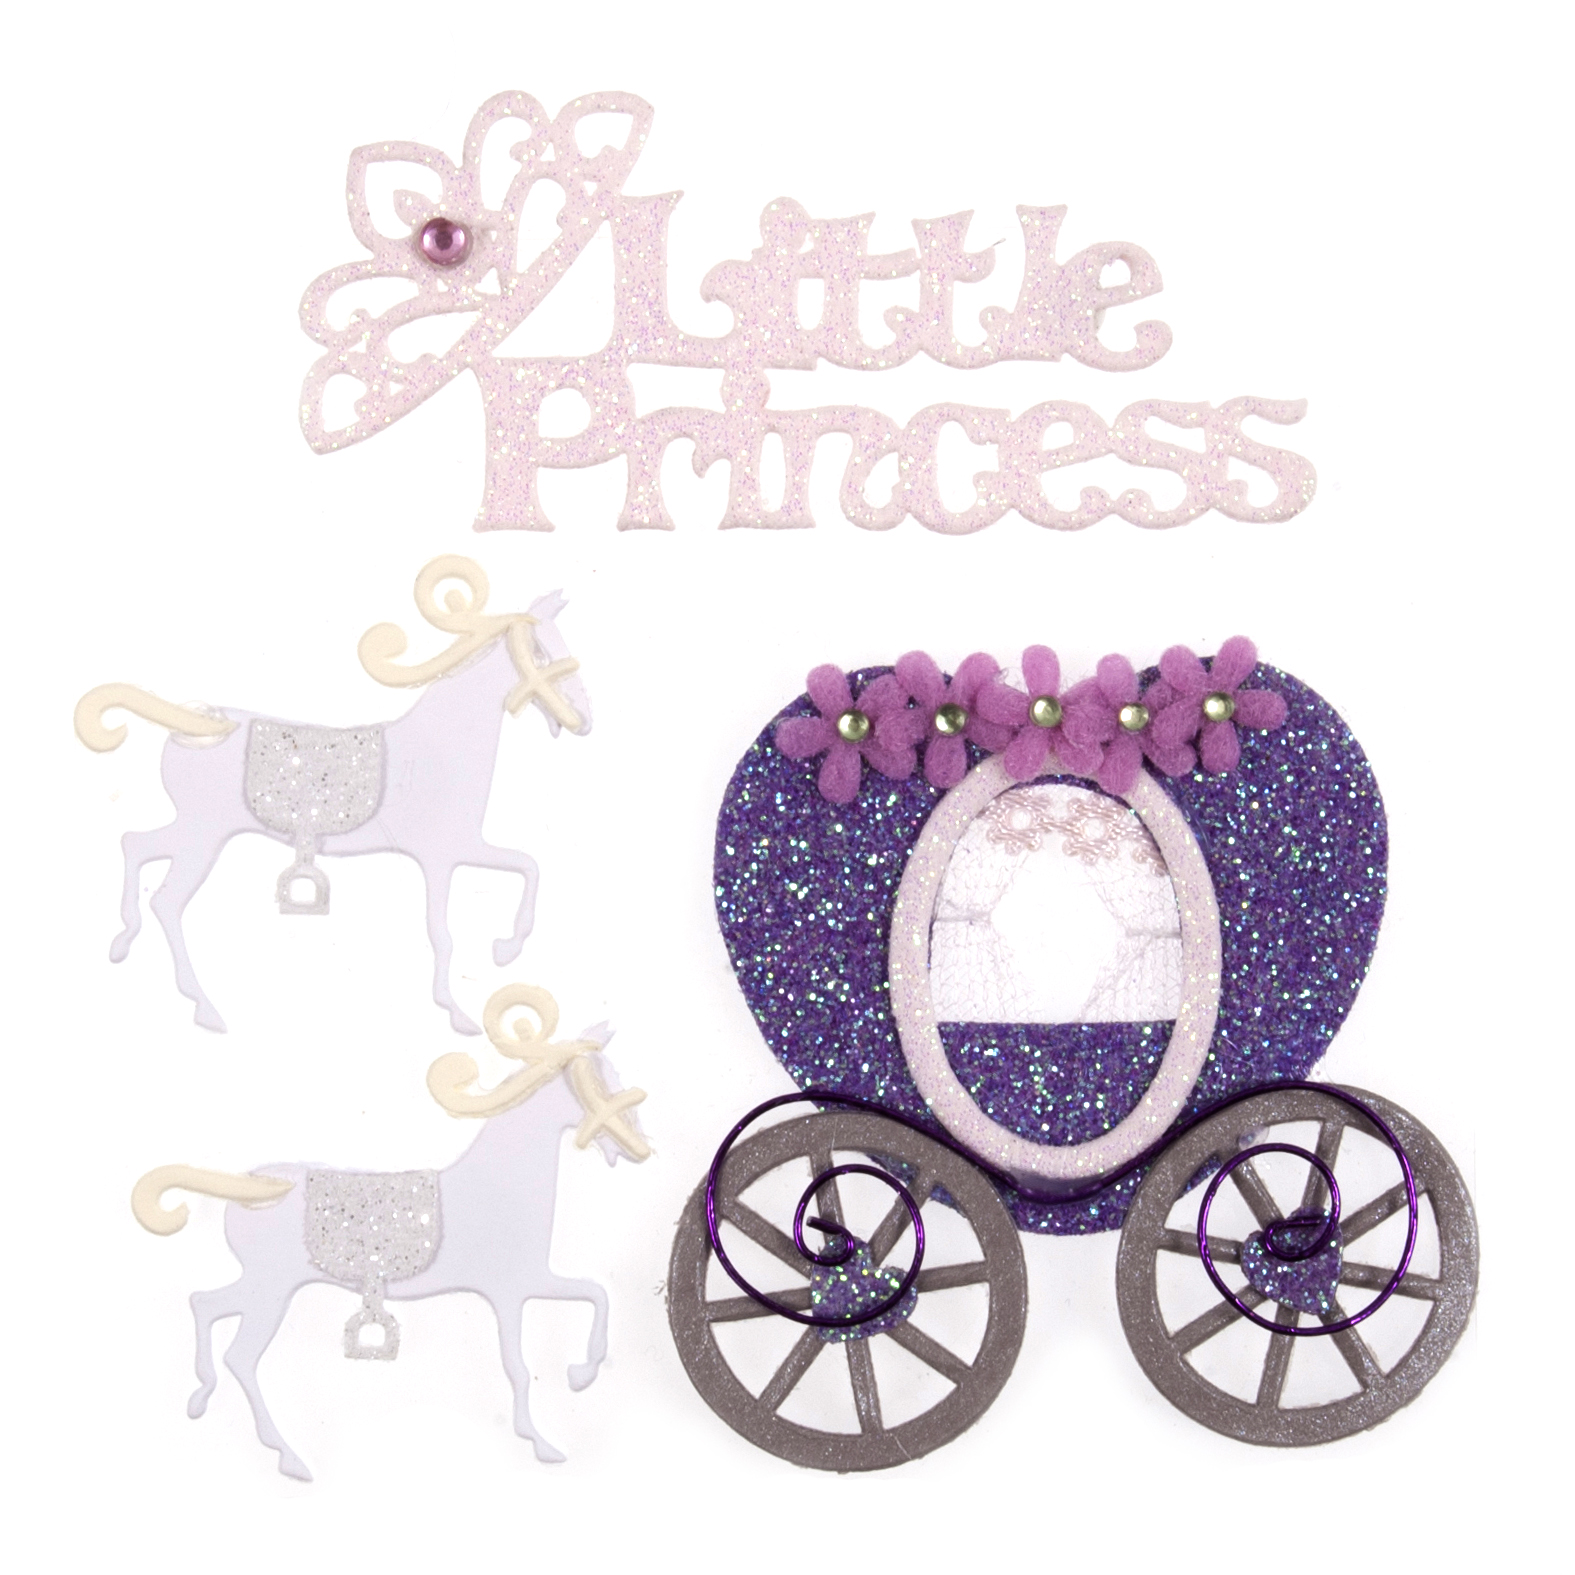 Picture of Craft Embellishments: Princess Carriage: Pack of 4